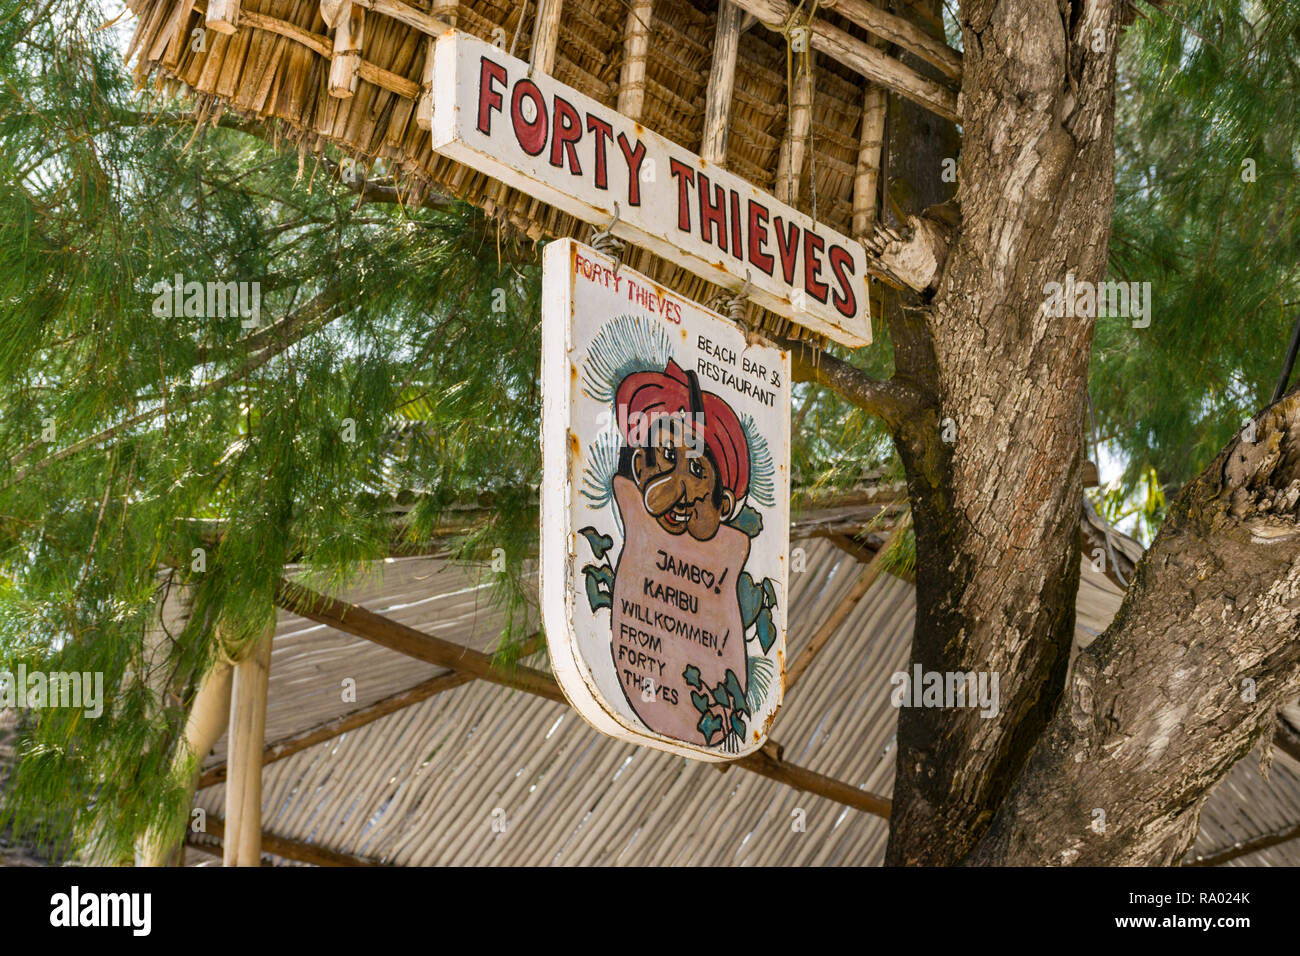 A sign for the Forty Thieves beach bar and restaurant hangs from a tree in the shade on a sunny day, Diani, Kenya Stock Photo